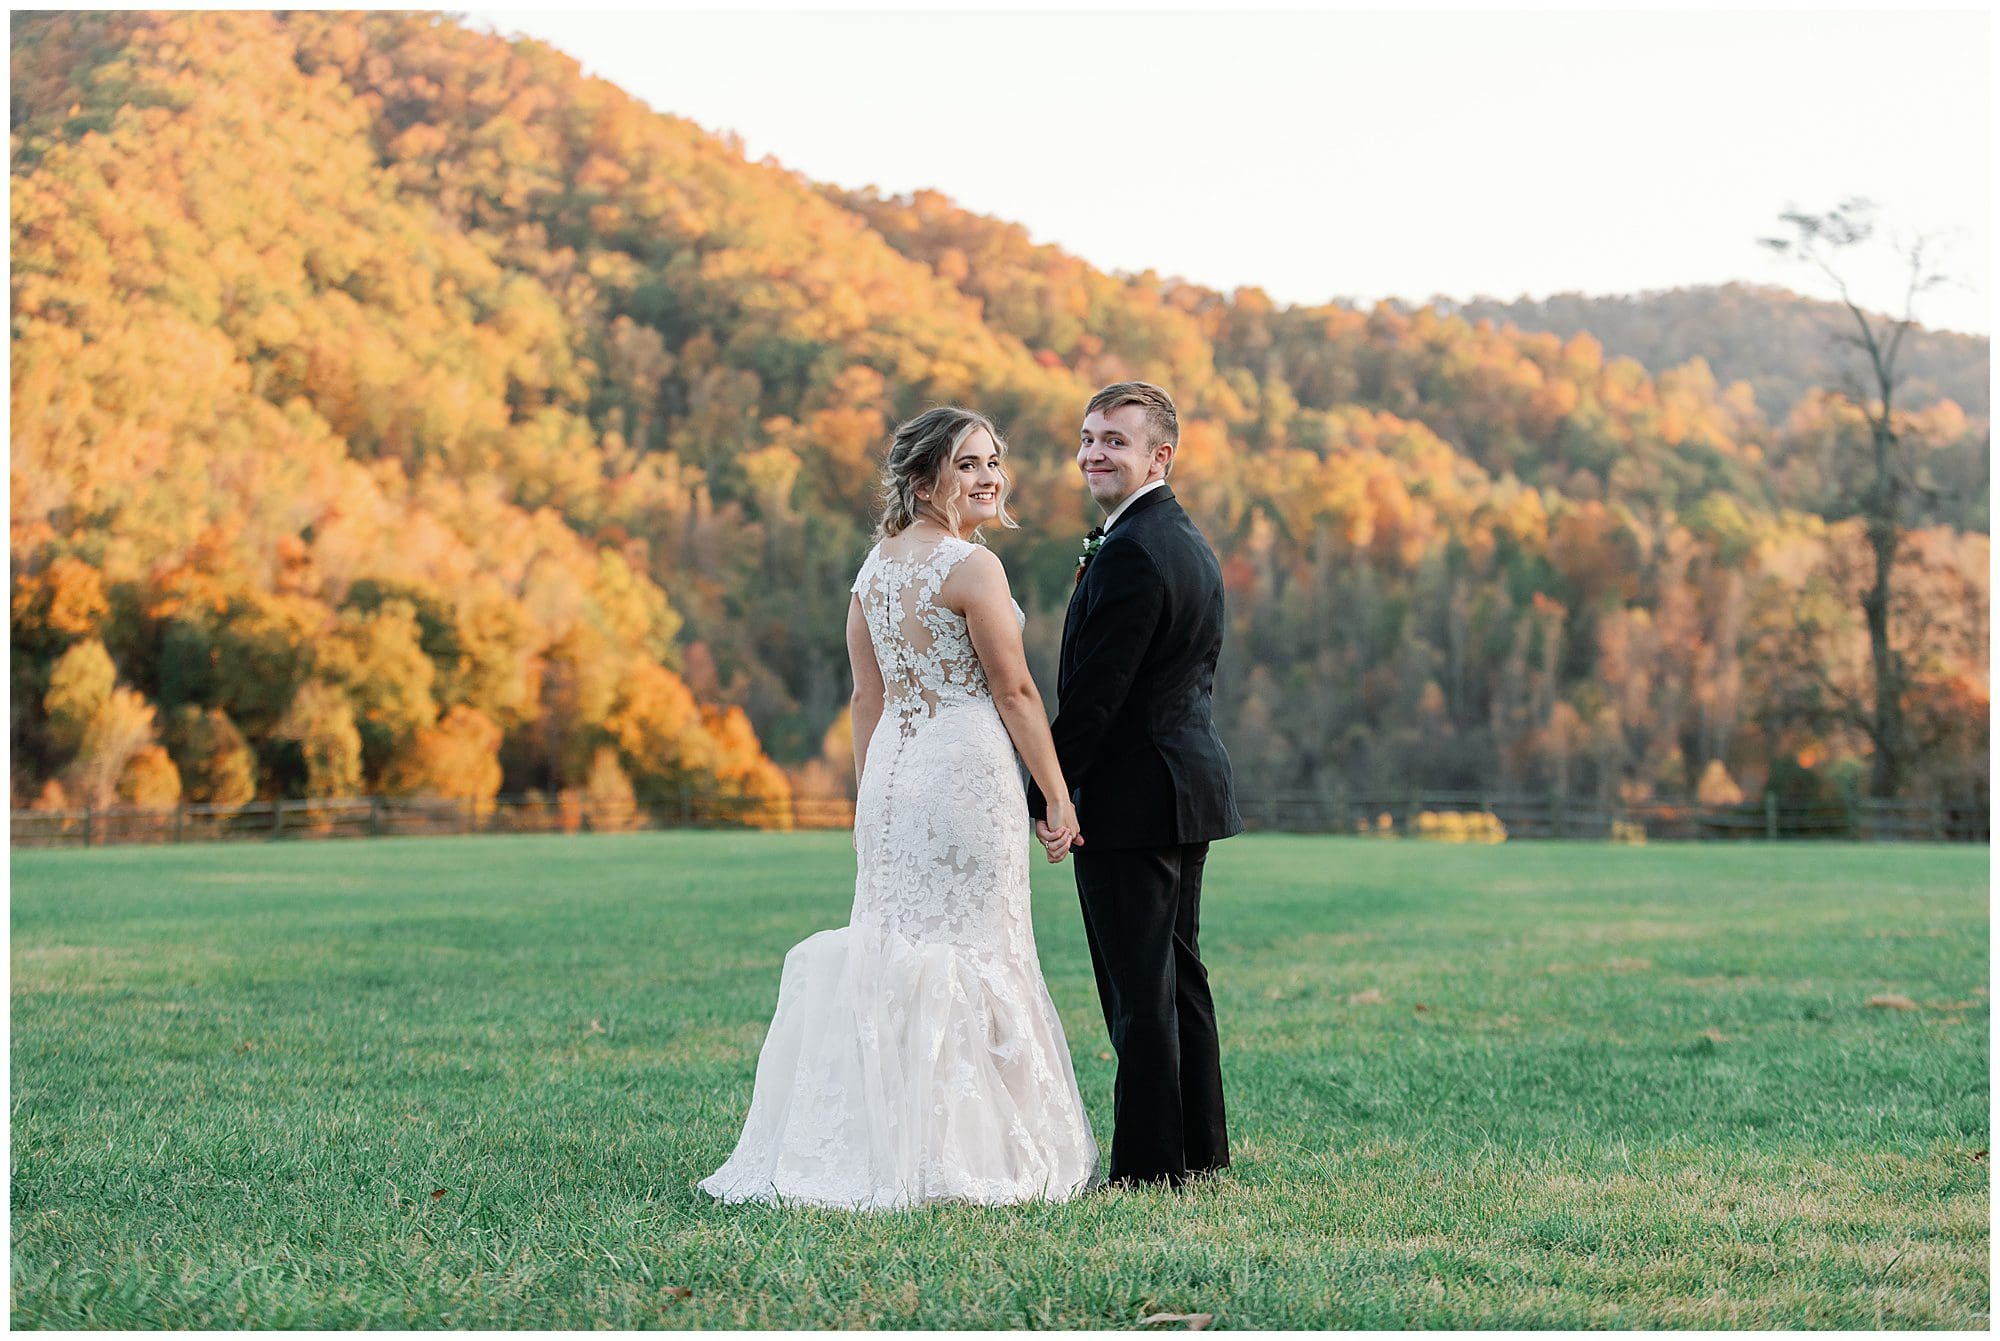 A bride and groom smile while holding hands in a field, with autumn-colored trees in the background.